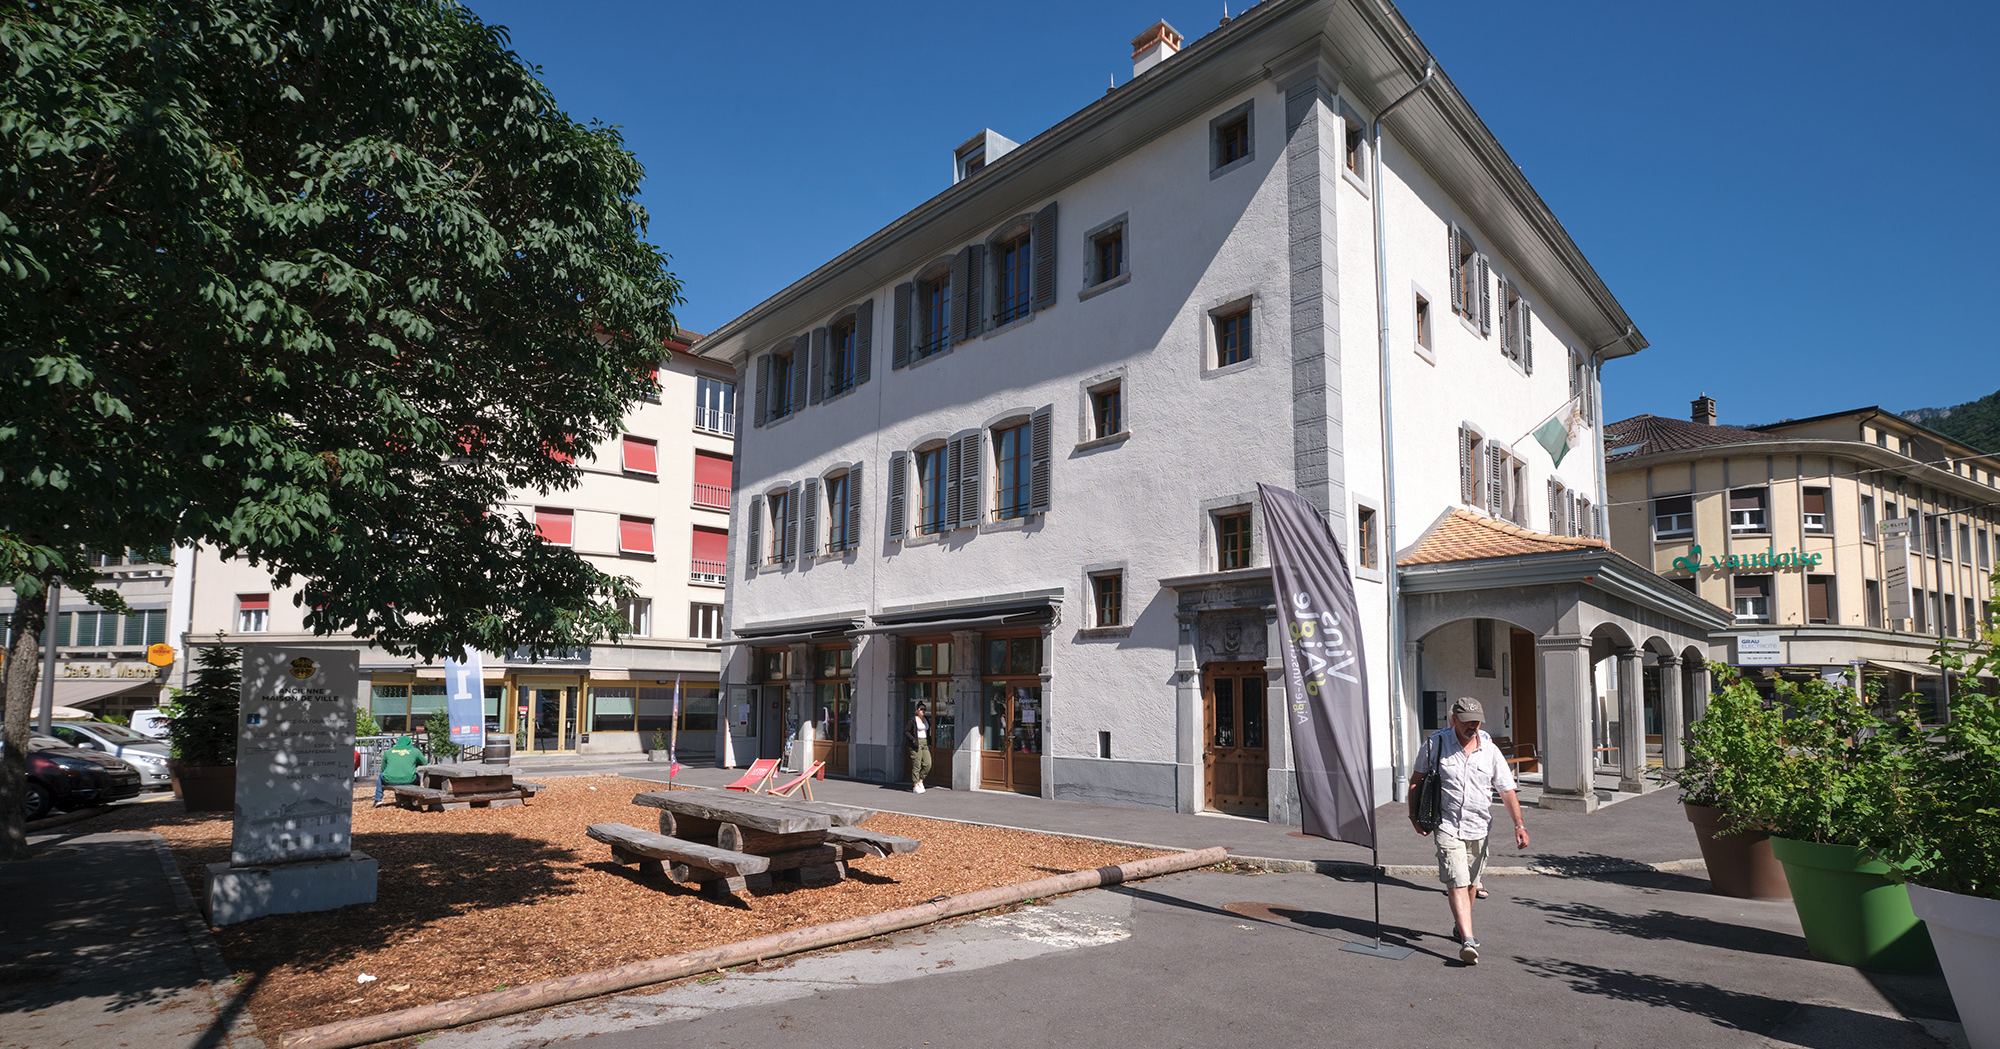 Old Town Hall - Espace Graffenried - summer - Aigle